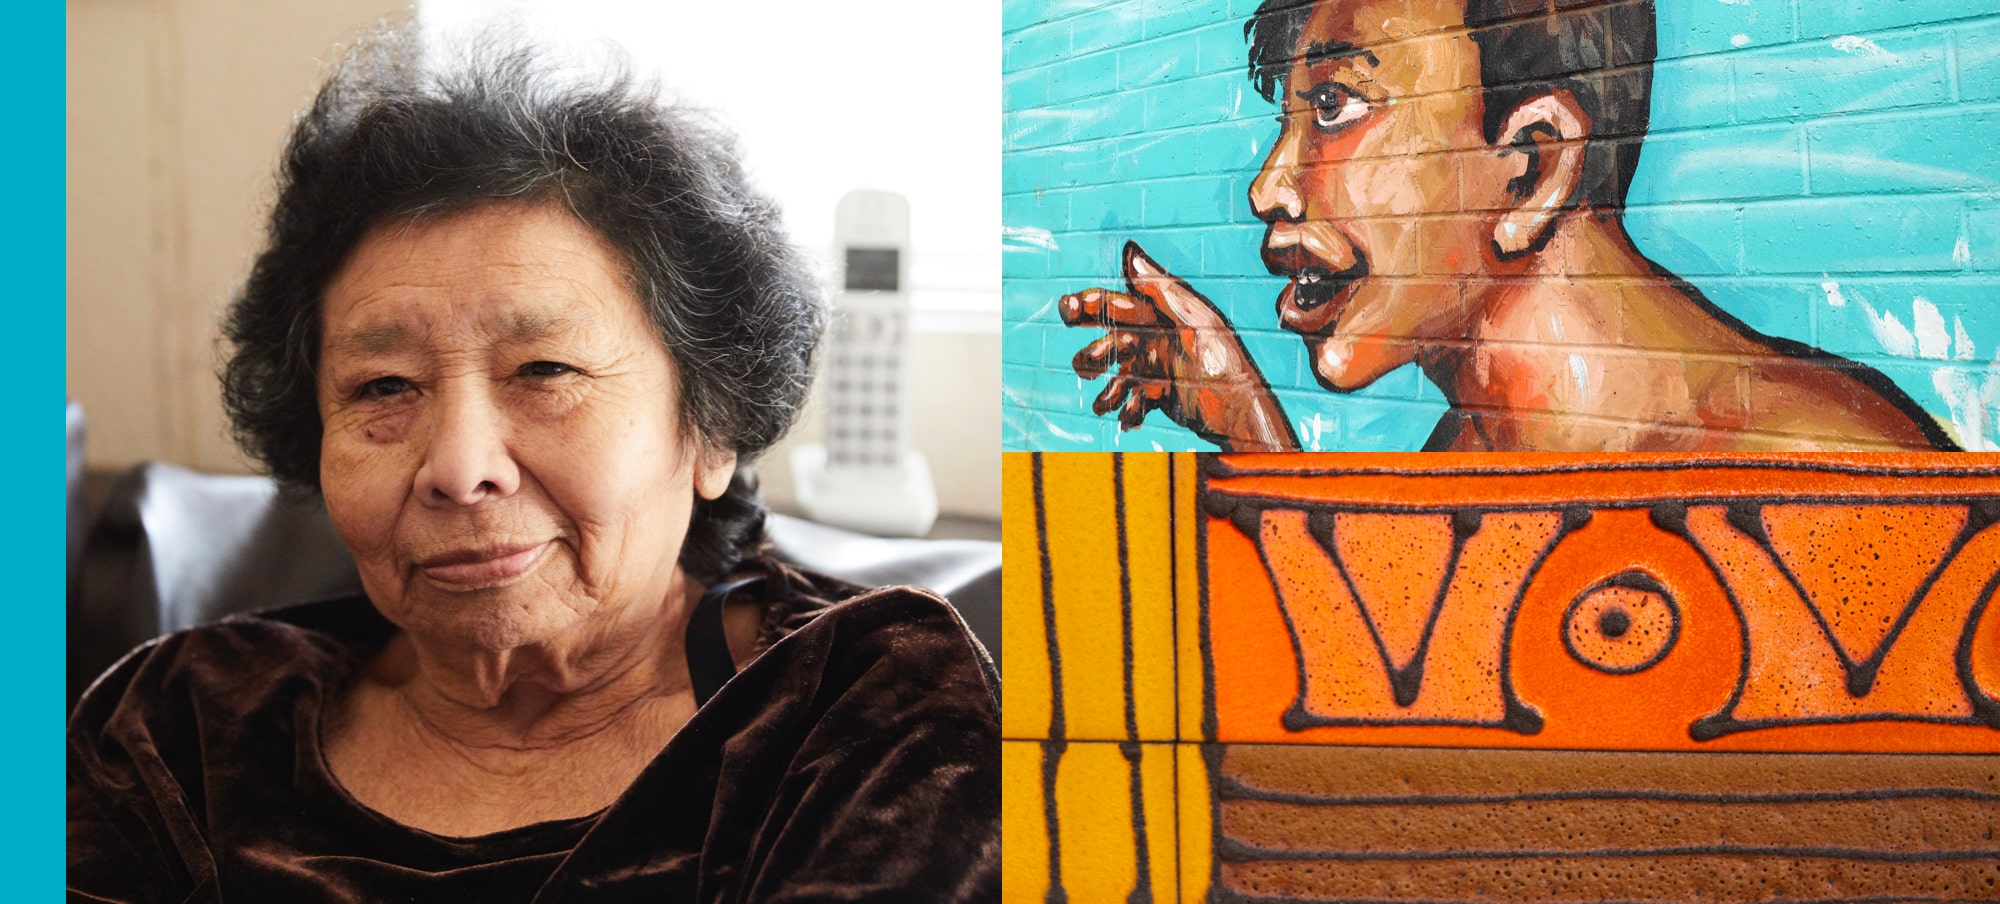 Collage of older Latina woman and a colorful mural